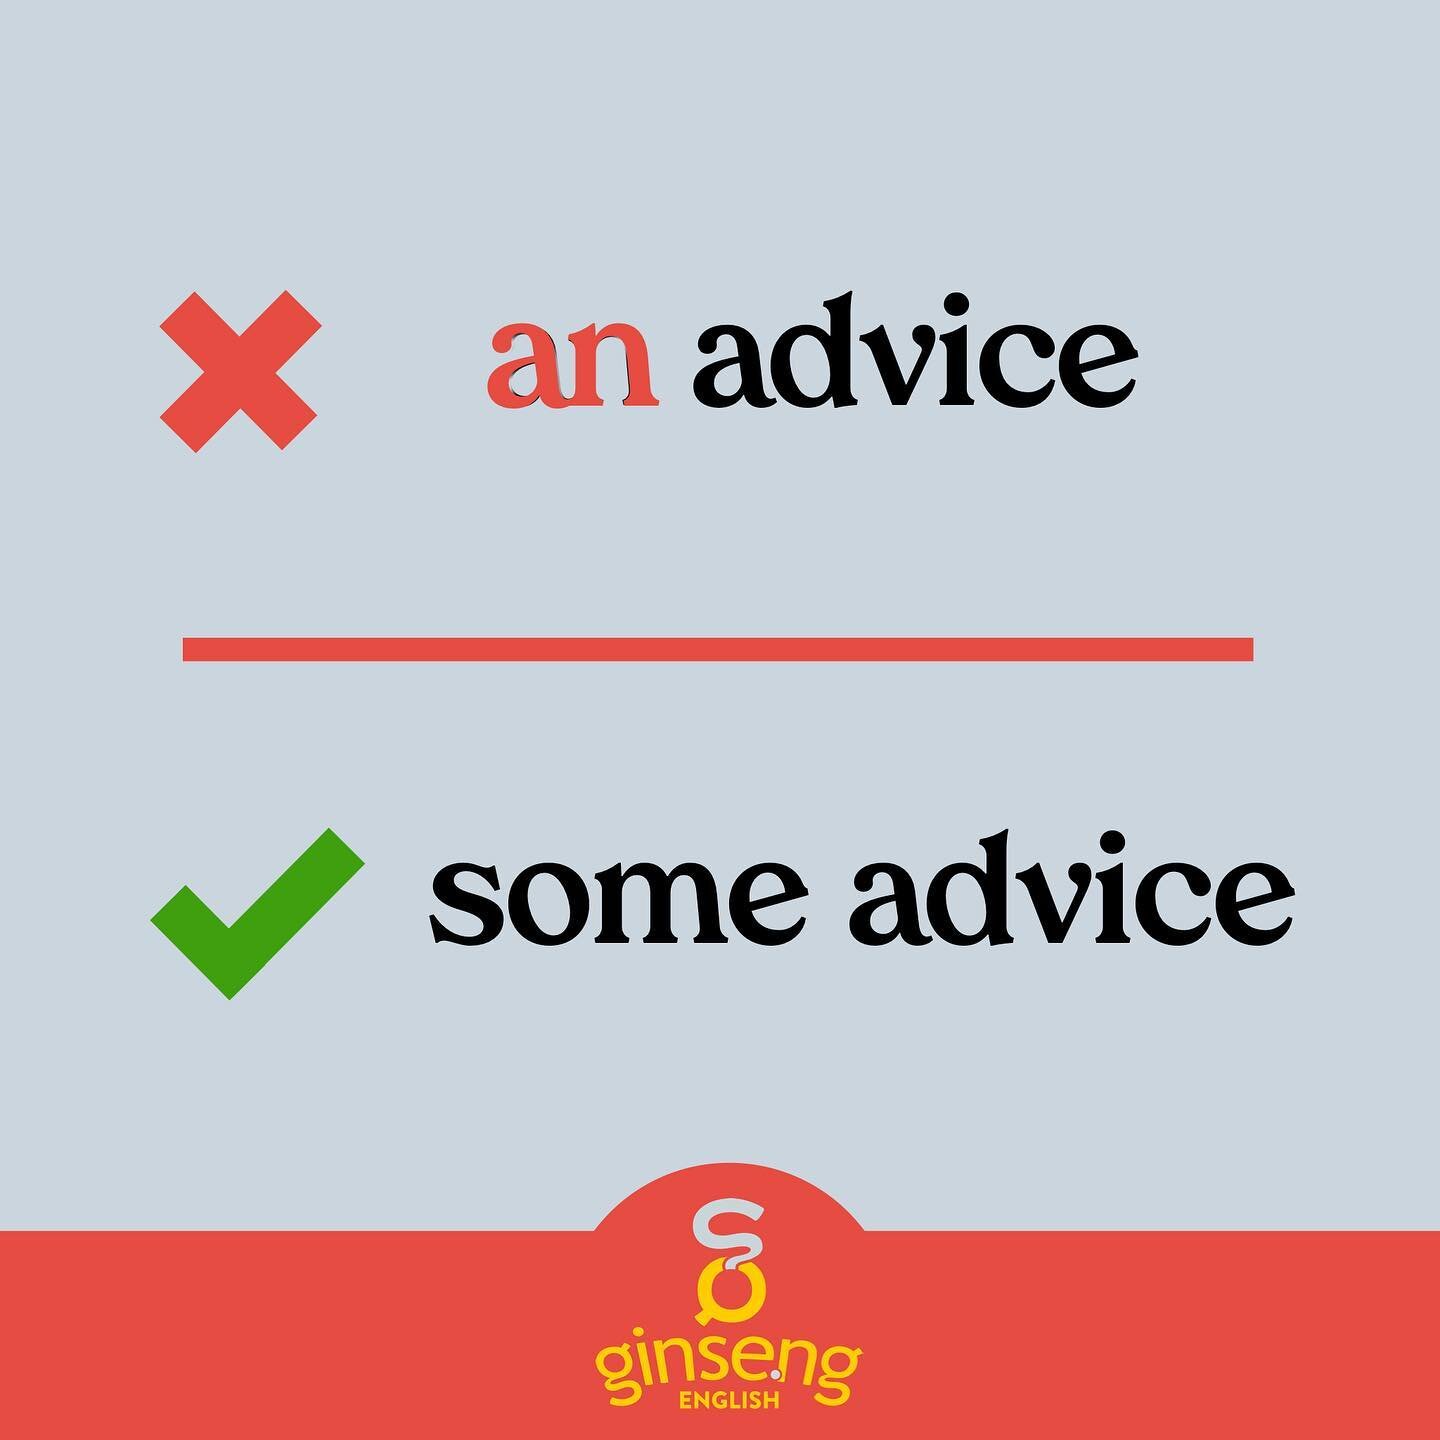 Careful! 

Advice is one of those crazy words in English that is uncountable even though we sometimes want to specify just one unit of advice. We cannot say &ldquo;an advice.&rdquo; Most of the time we just say &ldquo;some advice.&rdquo; If you reall